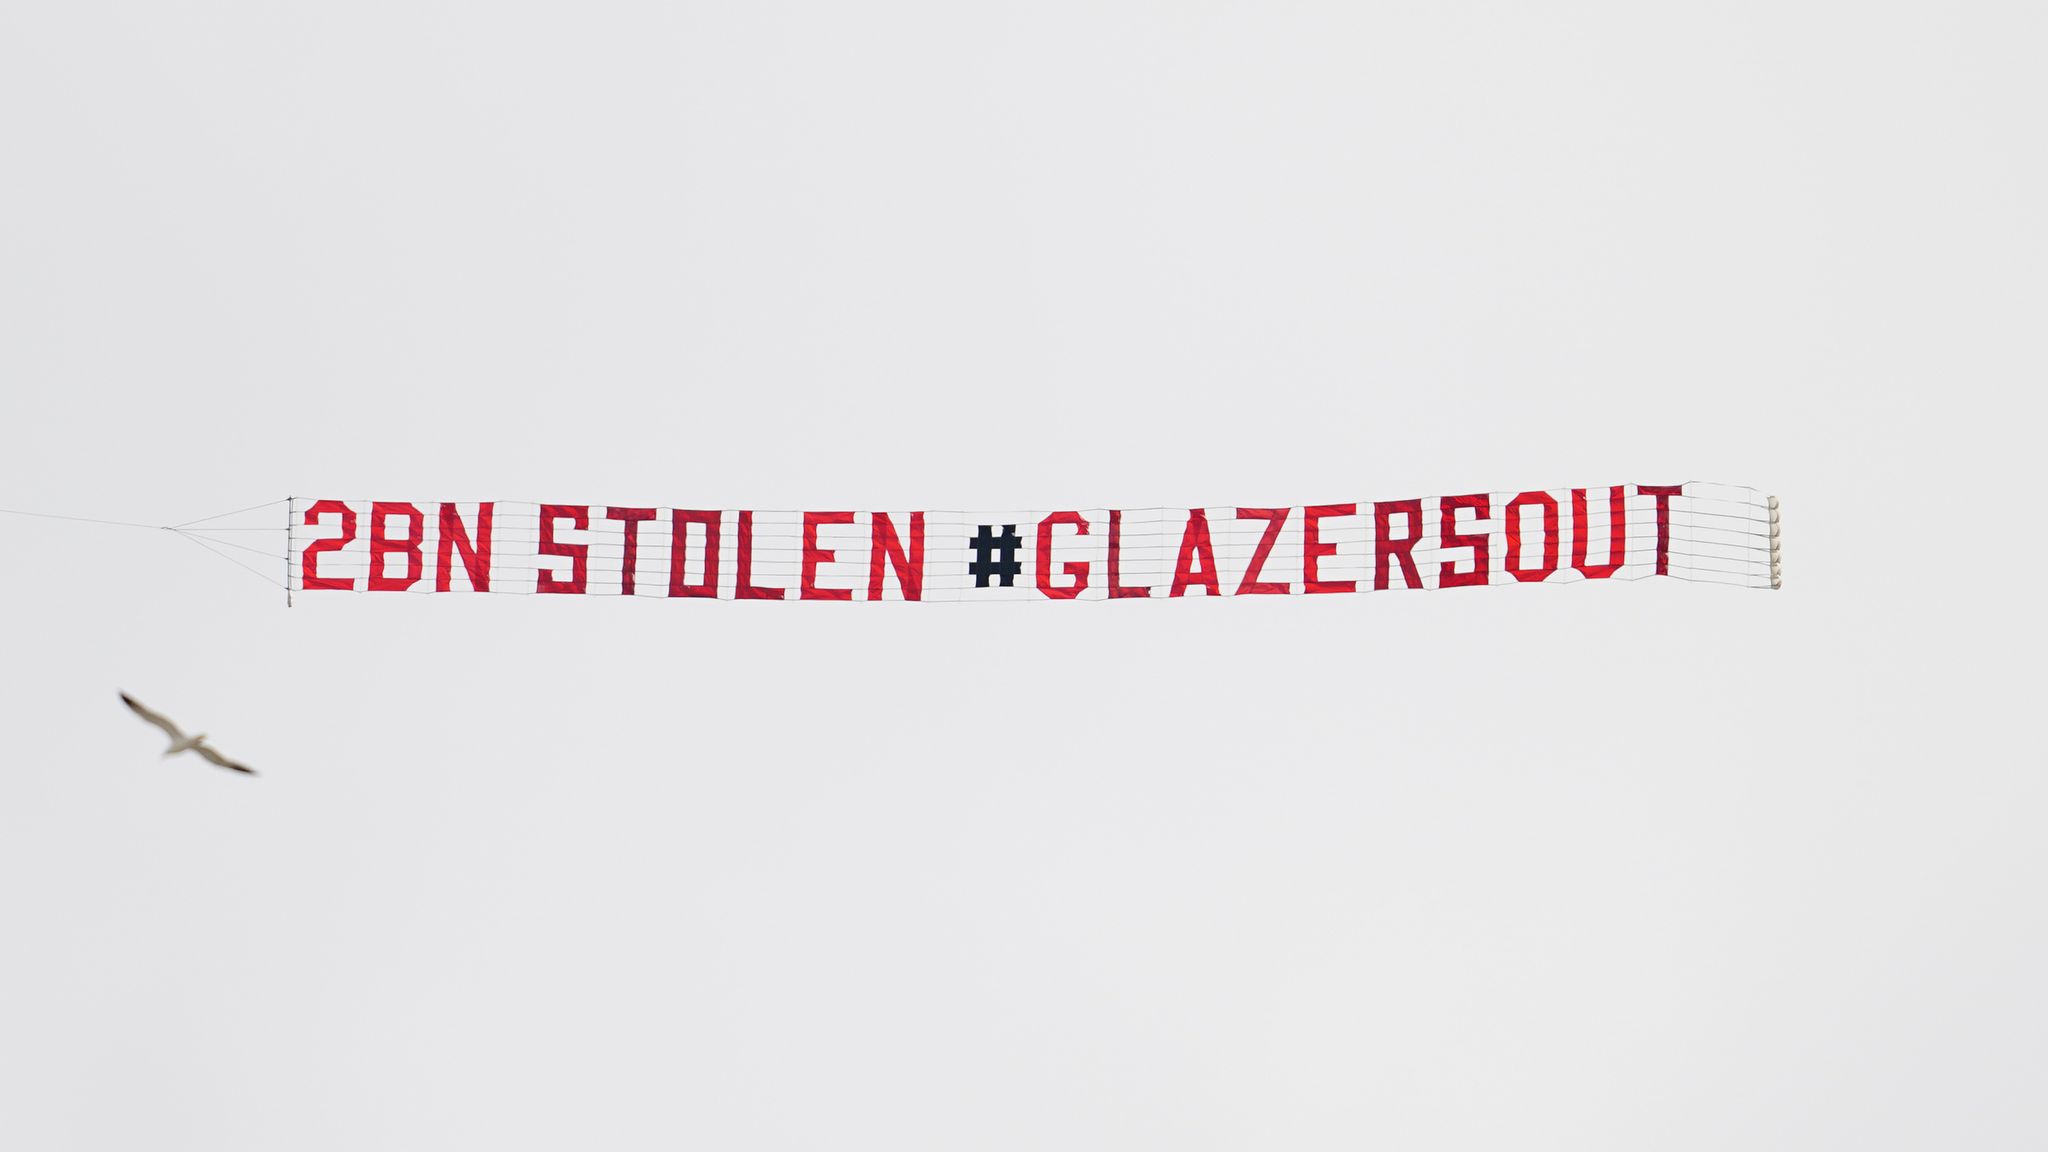 Glazers Out